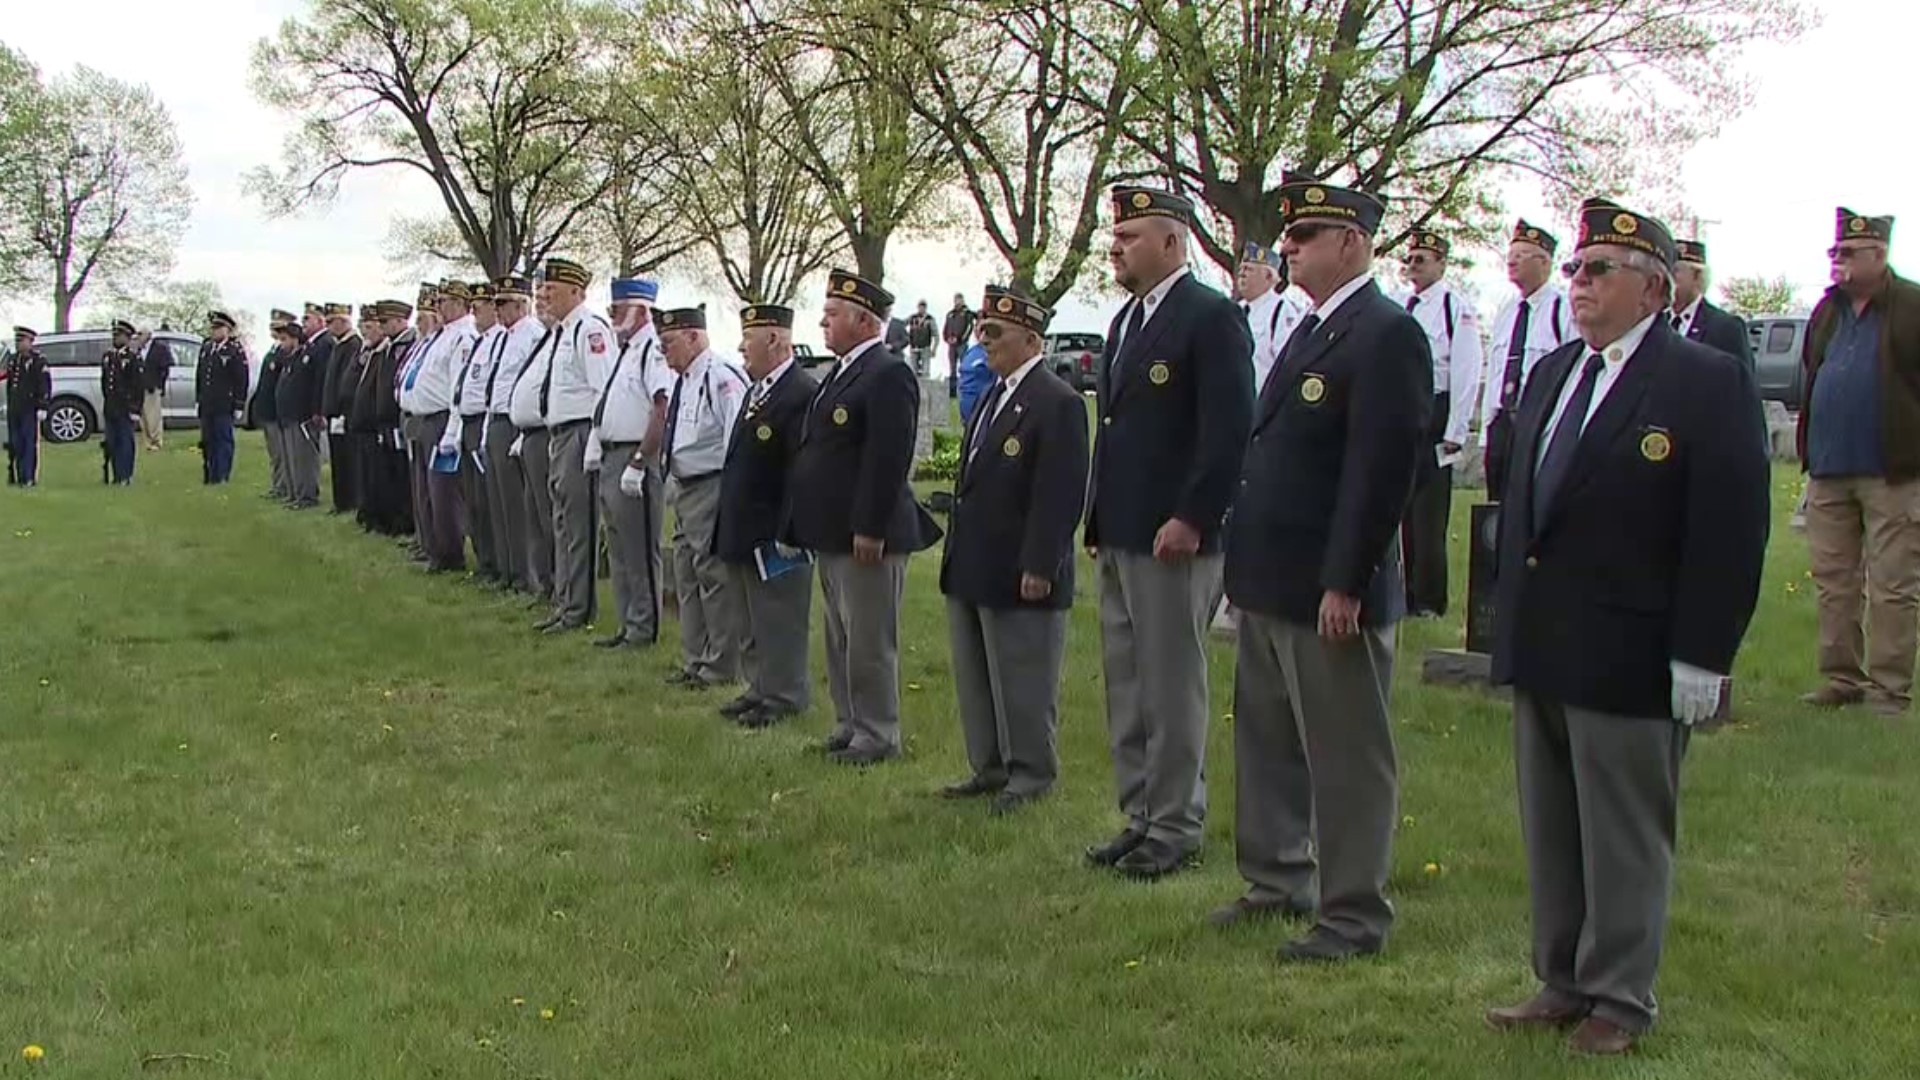 Dozens of people gathered at a cemetery in Milton Saturday to honor a fallen World War II soldier.